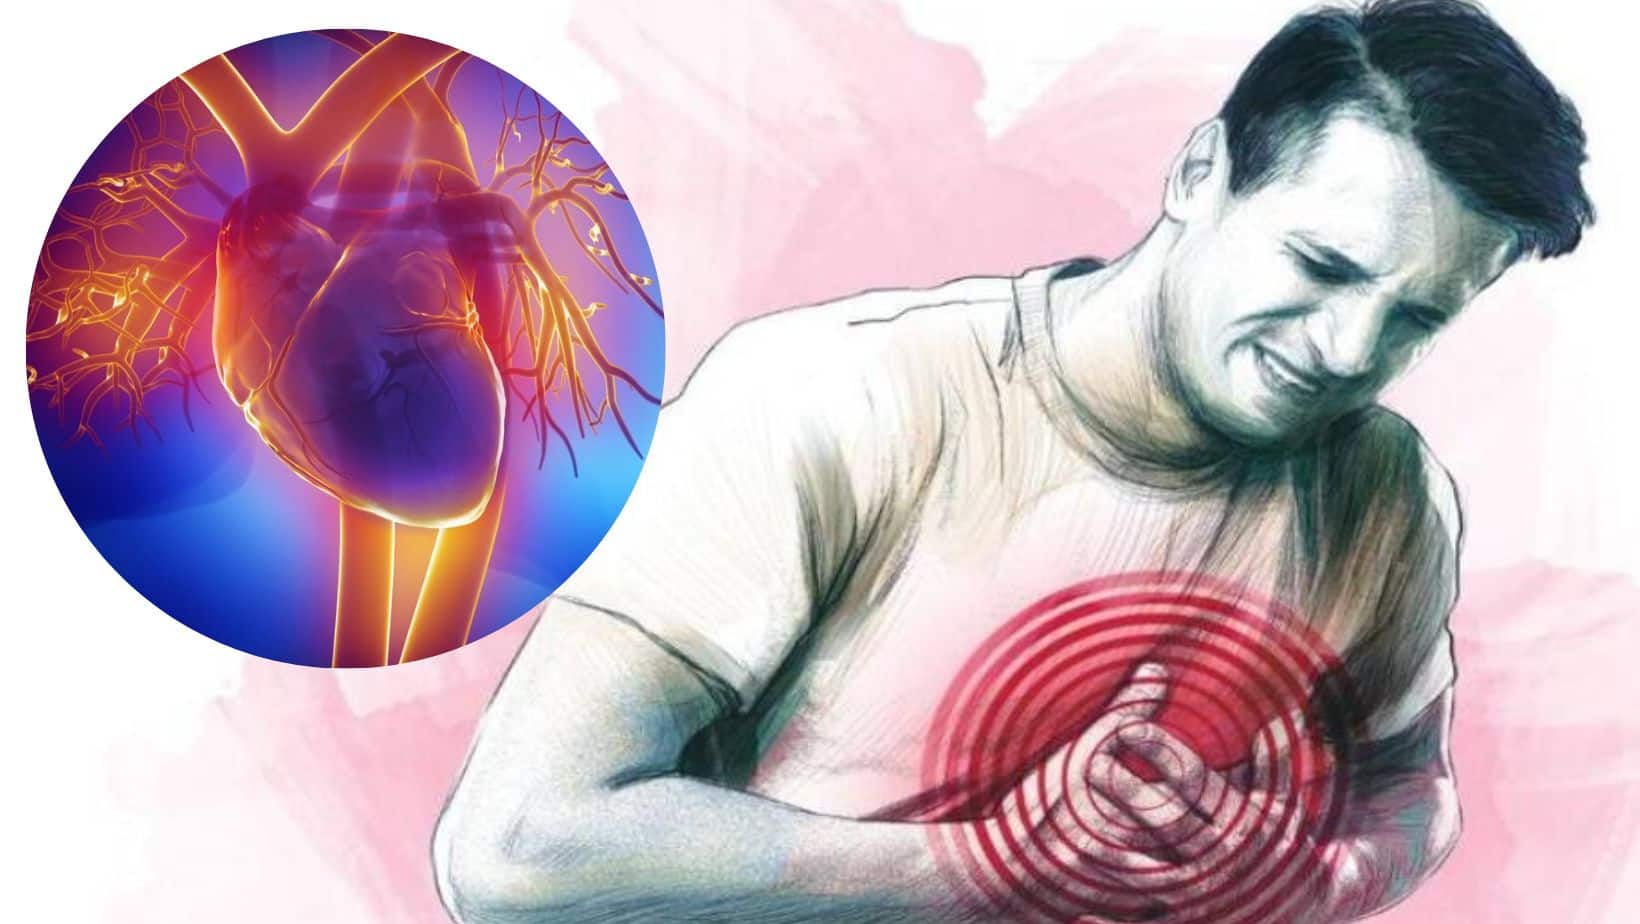 Chest Pain and Then Blockage In The Heart: How 18-Year-Old College Succumbed to Massive Heart Attack